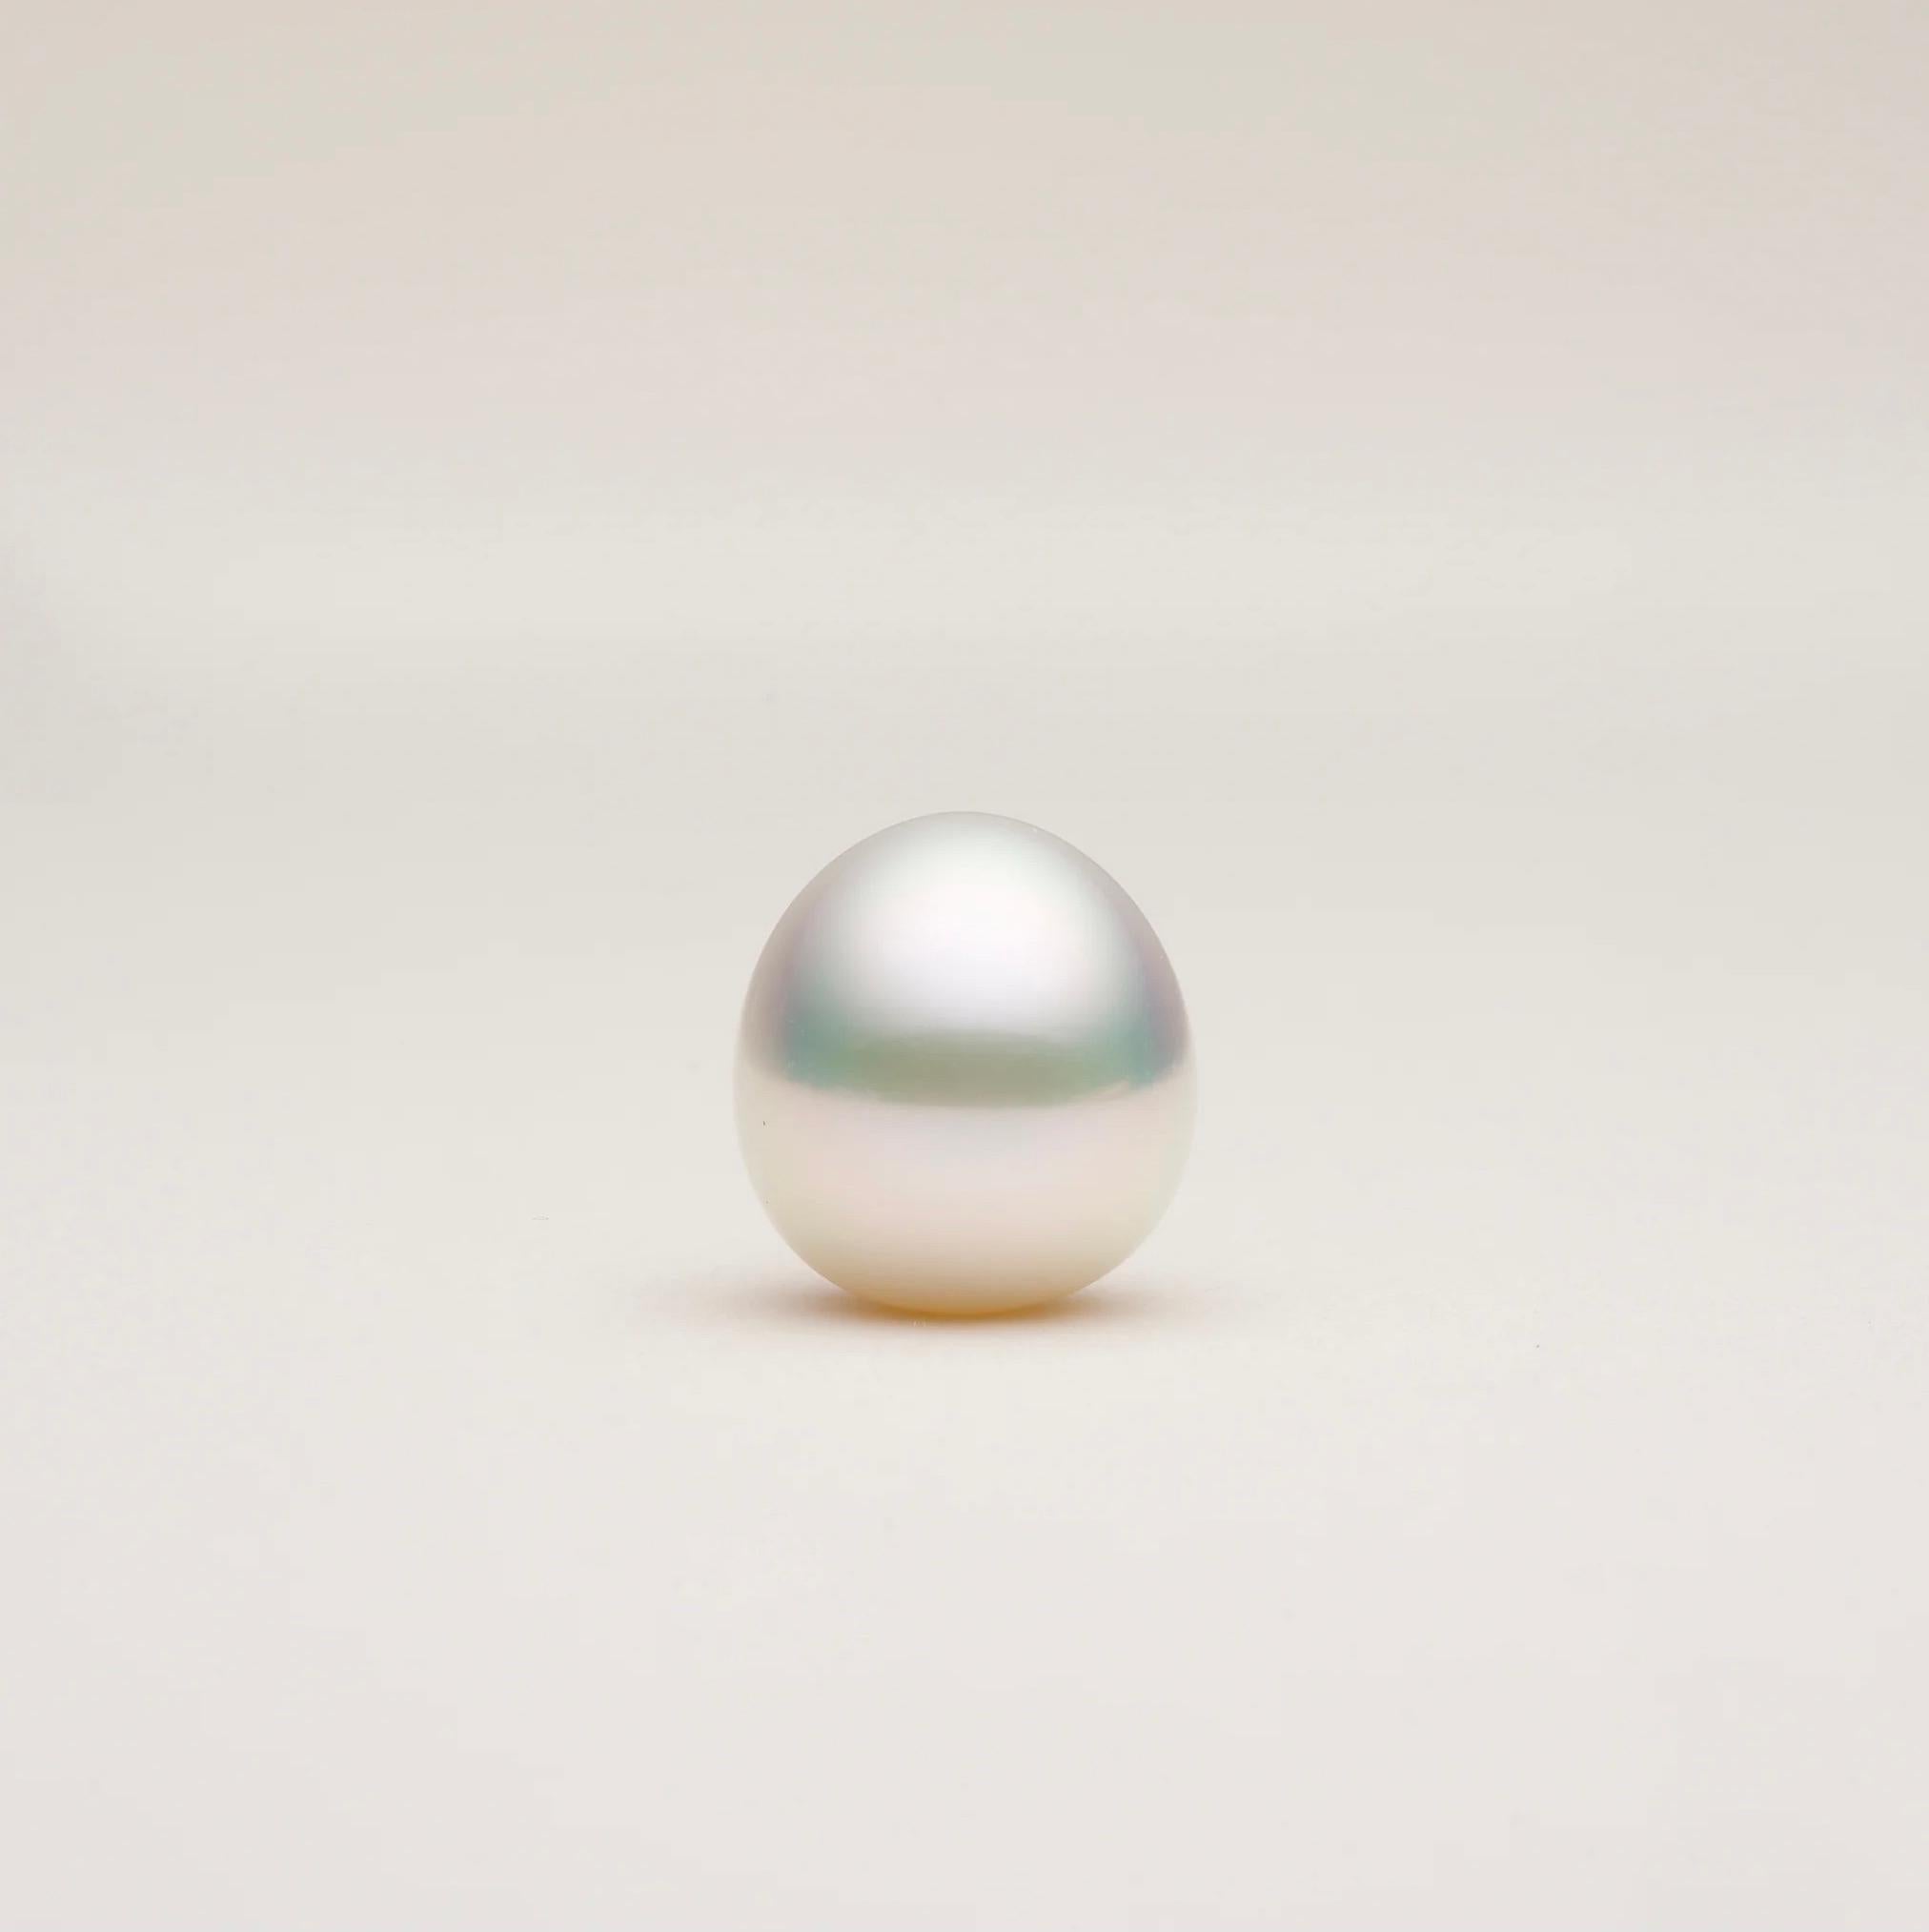 SINGLE IRREGULAR DROP 12 MM PEARL, FLAWLESS COMPLEXION, AAA/AA LUSTRE, SILVER WITH PINK GREEN OVERTONES.


These pearls display their natural colour and lustre and have not been subjected to chemical enhancements or